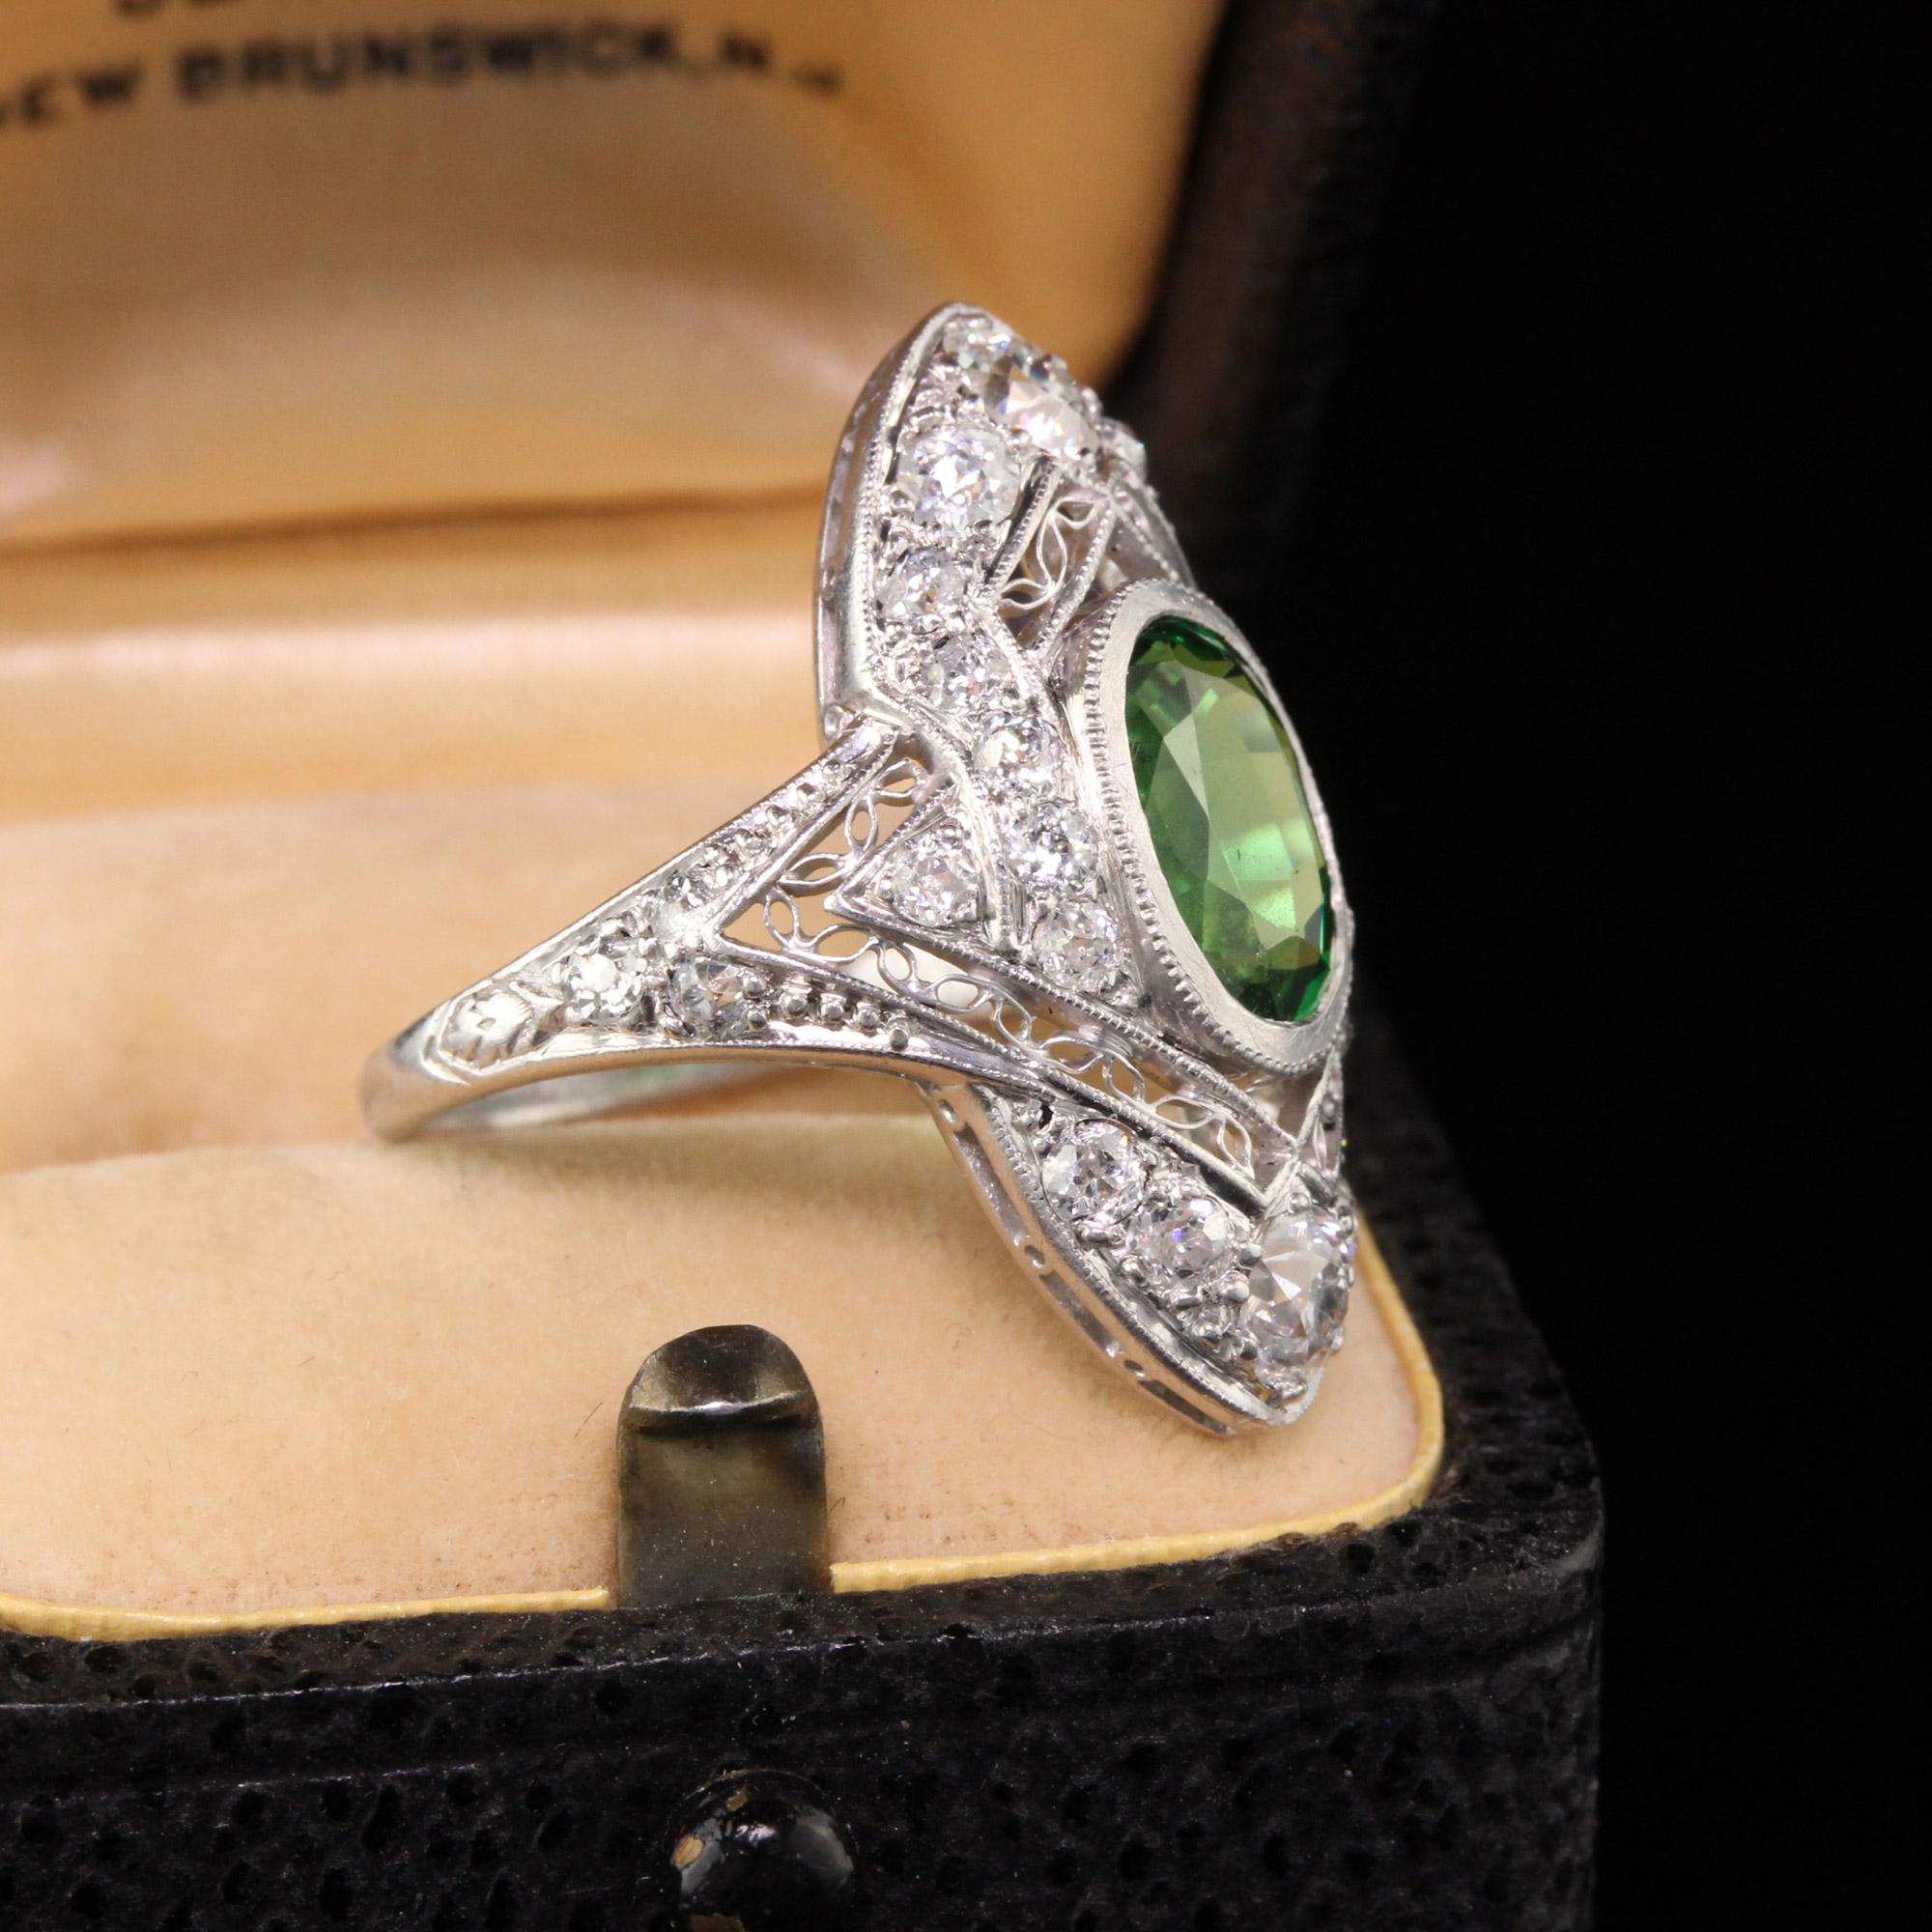 Beautiful Antique Art Deco William Wise and Son Platinum Tsavorite Diamond Filigree Shield Ring. This beautiful ring is in great condition and has laced filigree work on it without any damage. Its a true work of art!

Item #R0668

Metal: